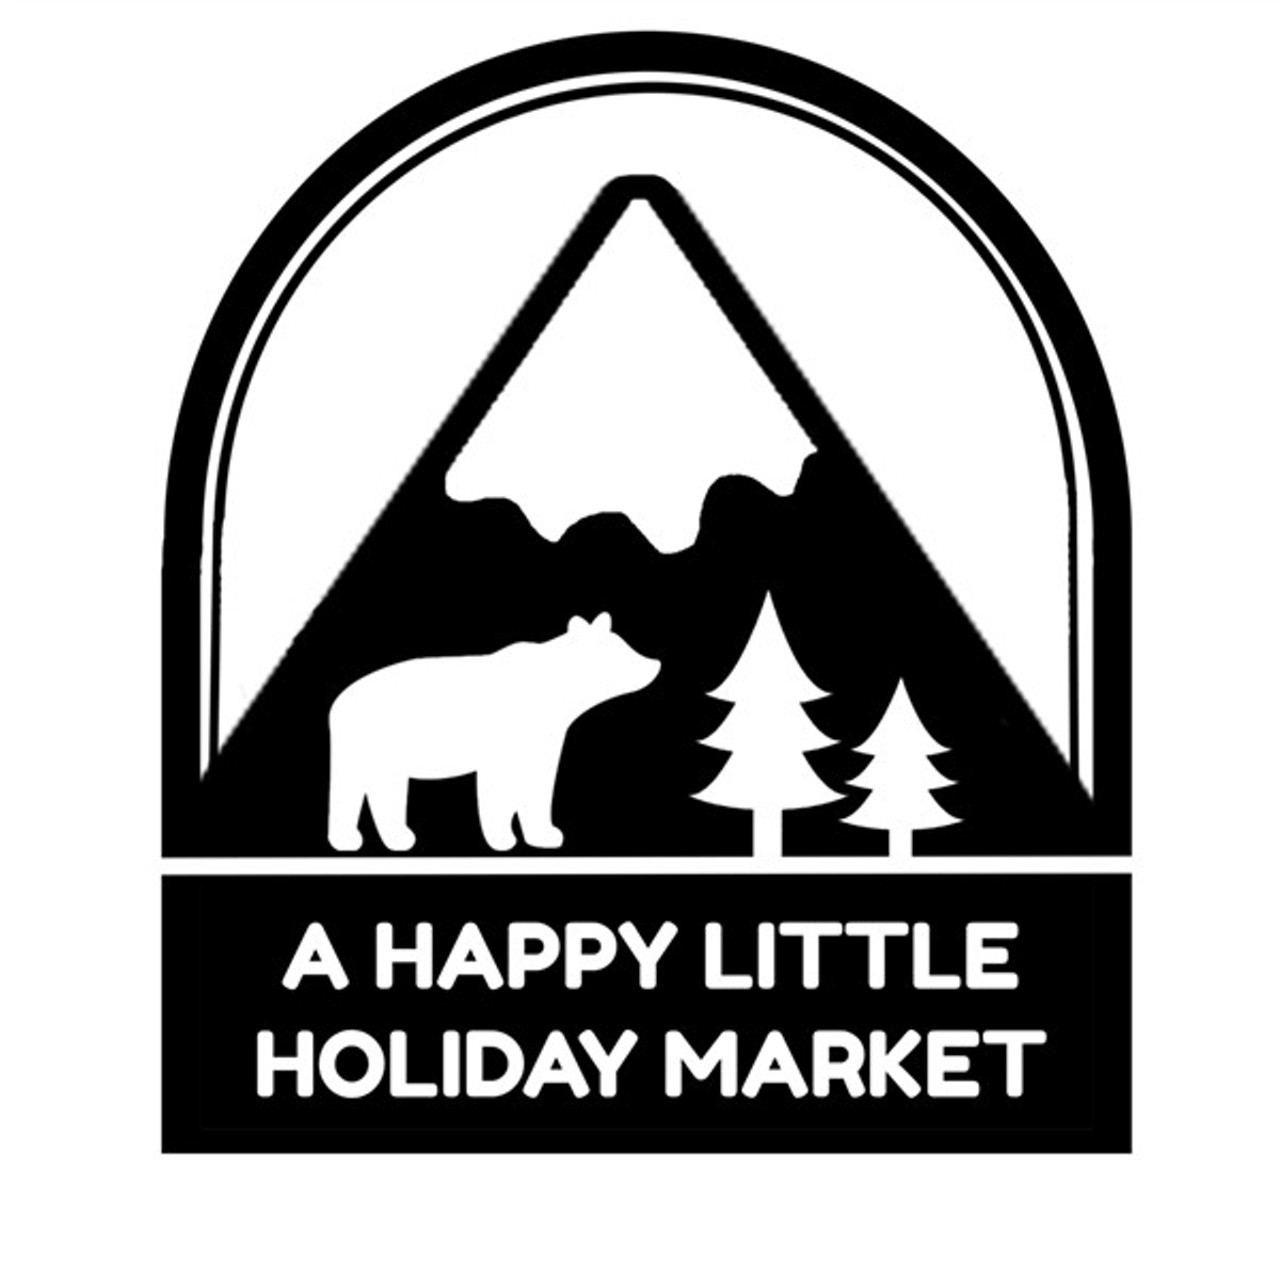 A Happy Little Holiday Market
December 1, 2018
With more than 70 vendors selling their goods, you're sure to find some great holiday gifts here. And if you need a break from getting your shop on, they will also have music and food trucks!
Check it out here.
Photo courtesy of Happy Little Events